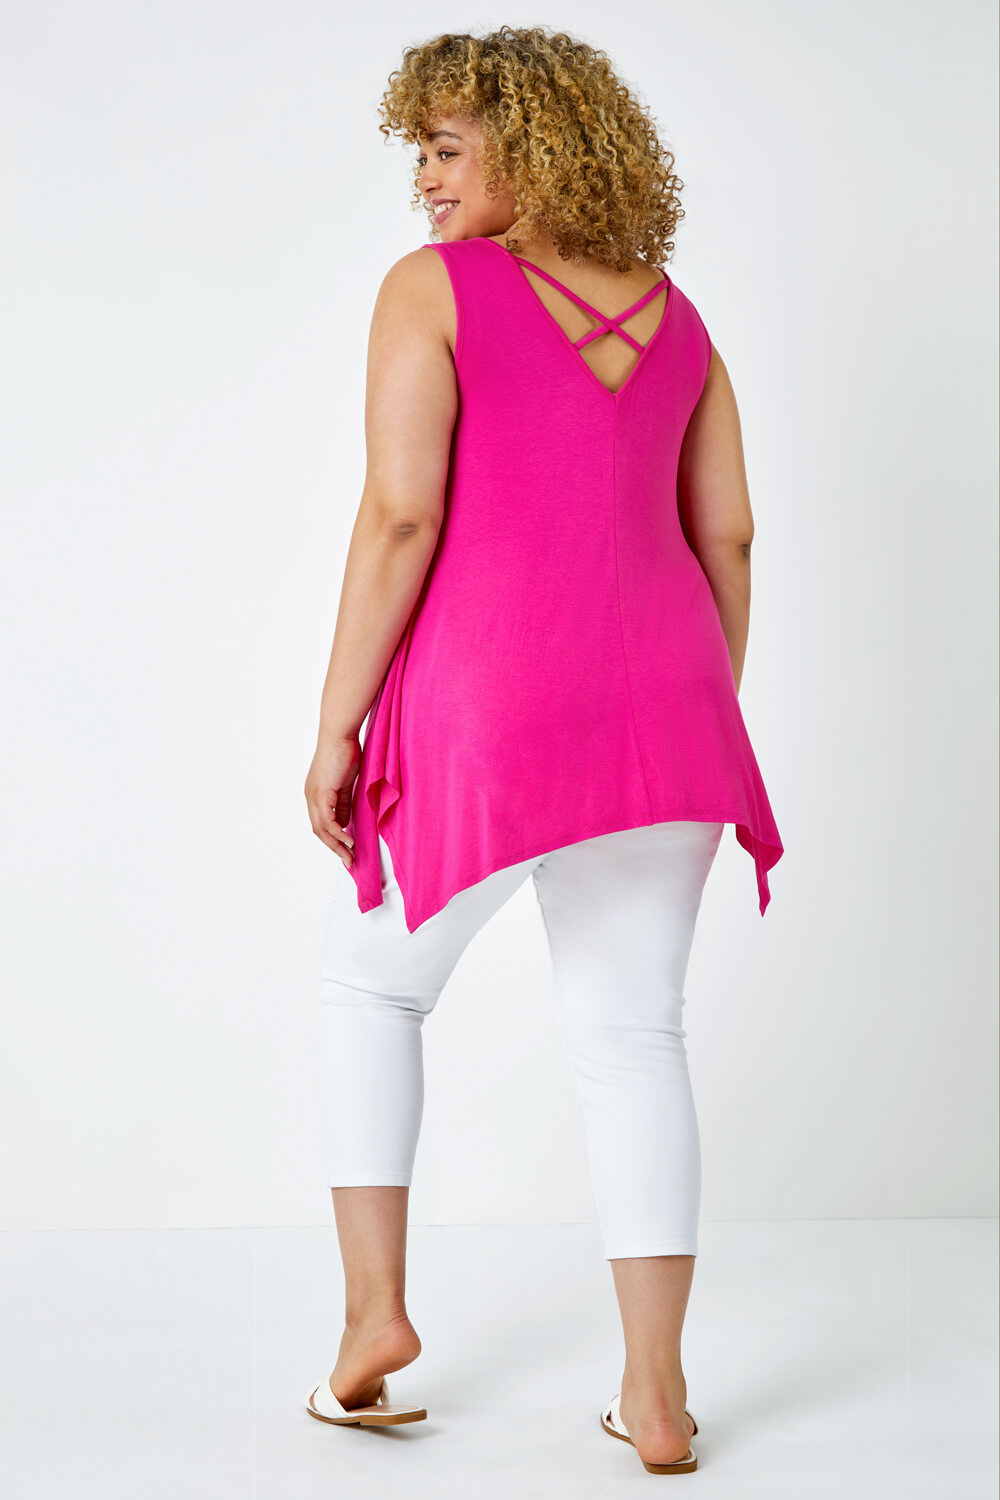 PINK Curve Cross Detail Stretch Vest Top, Image 2 of 5